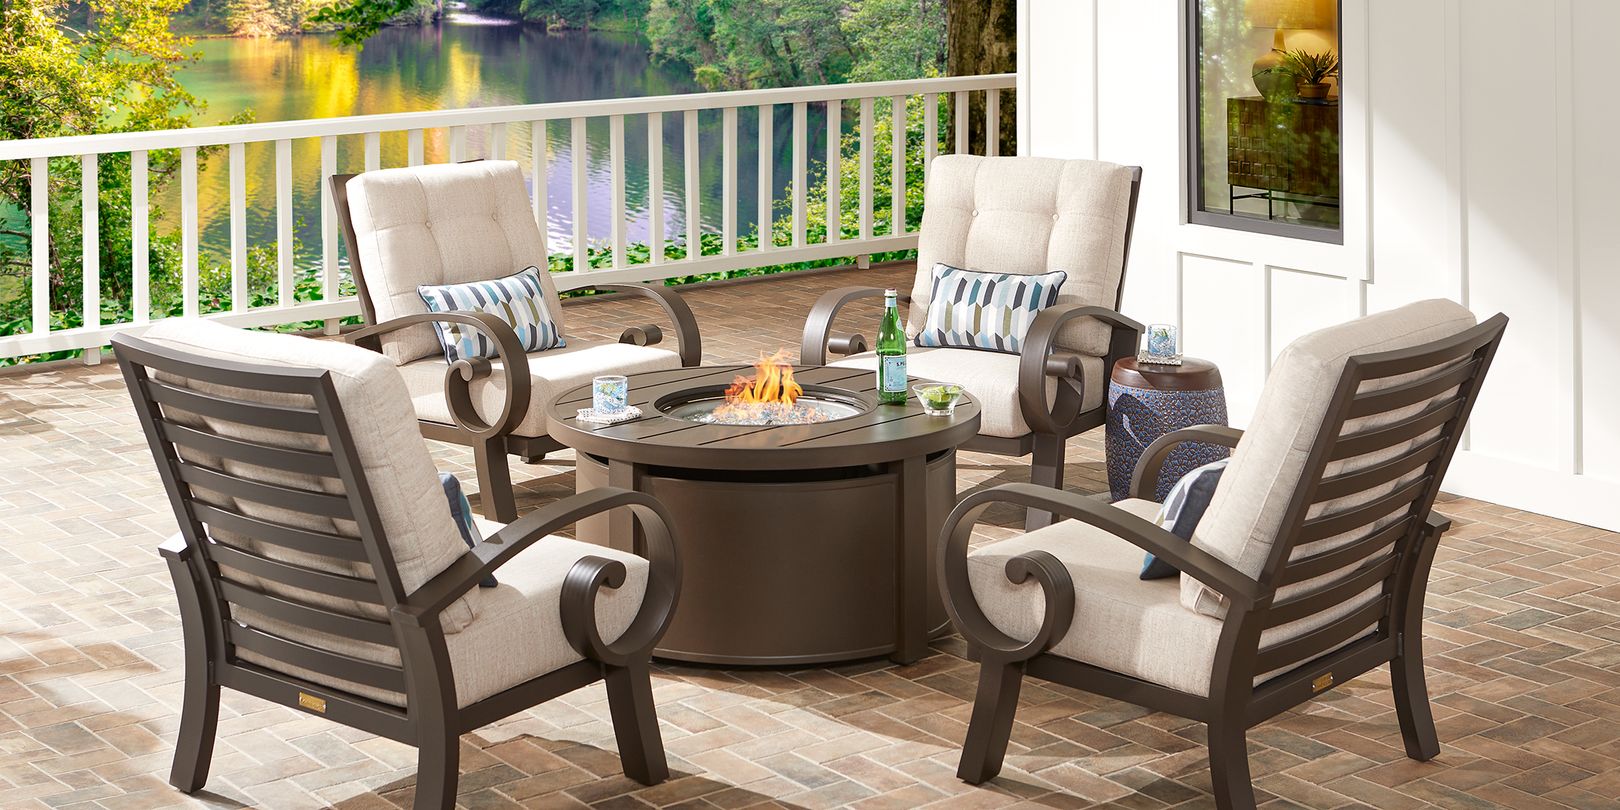 Photo of Four Chairs Arranged Around a Circular Fire Pit on a Patio